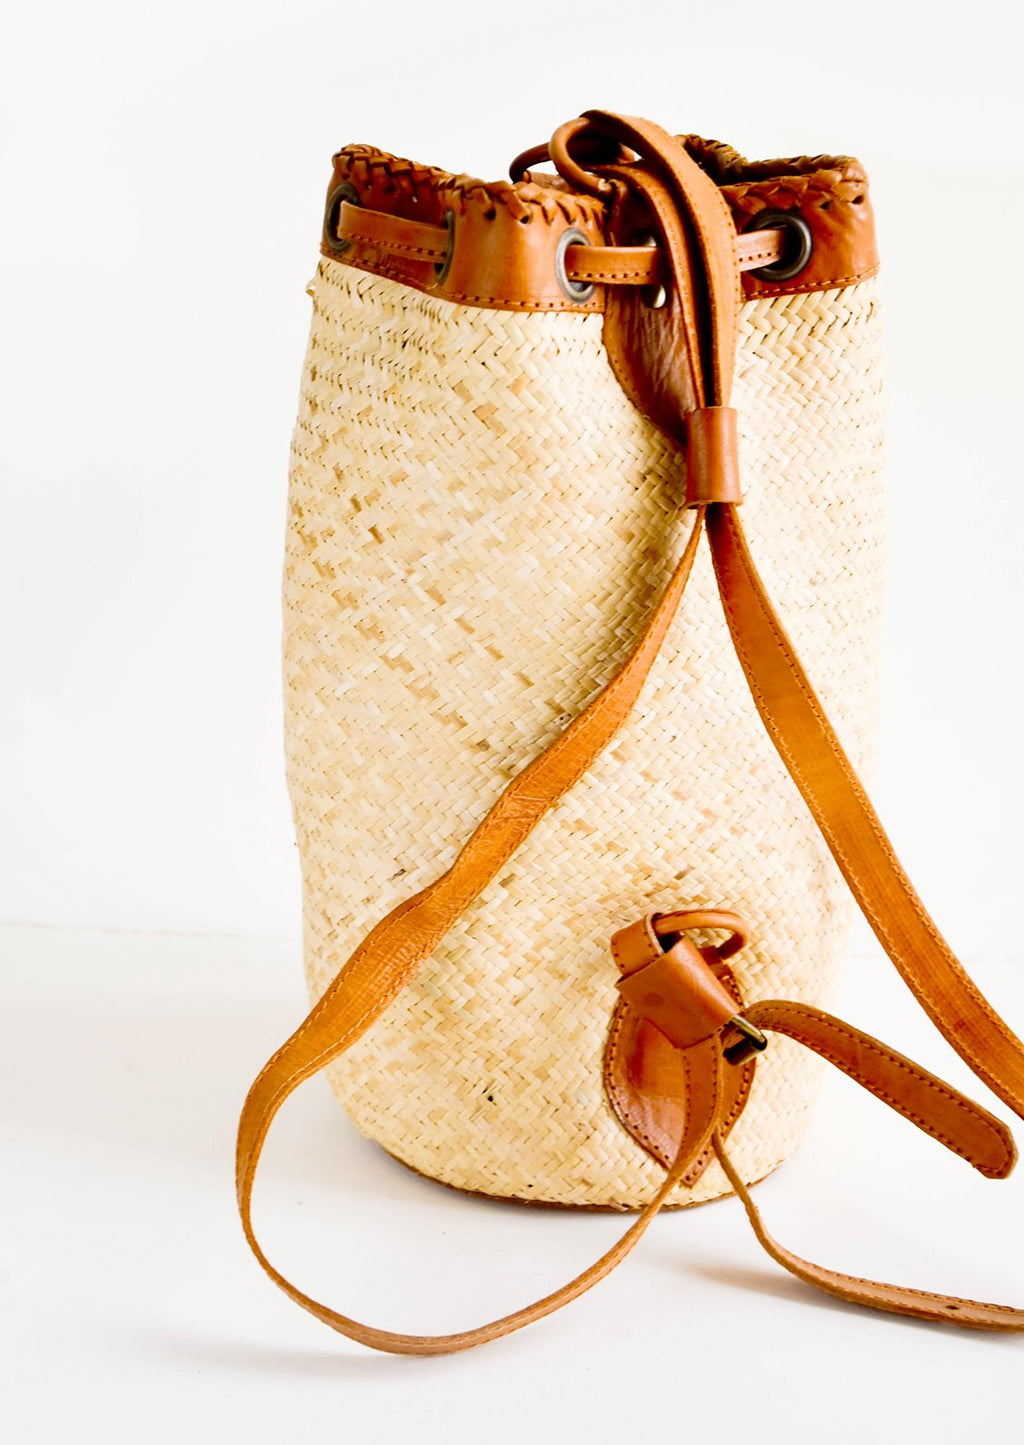 2: Tall and round woven straw bag with tanned leather backpack straps